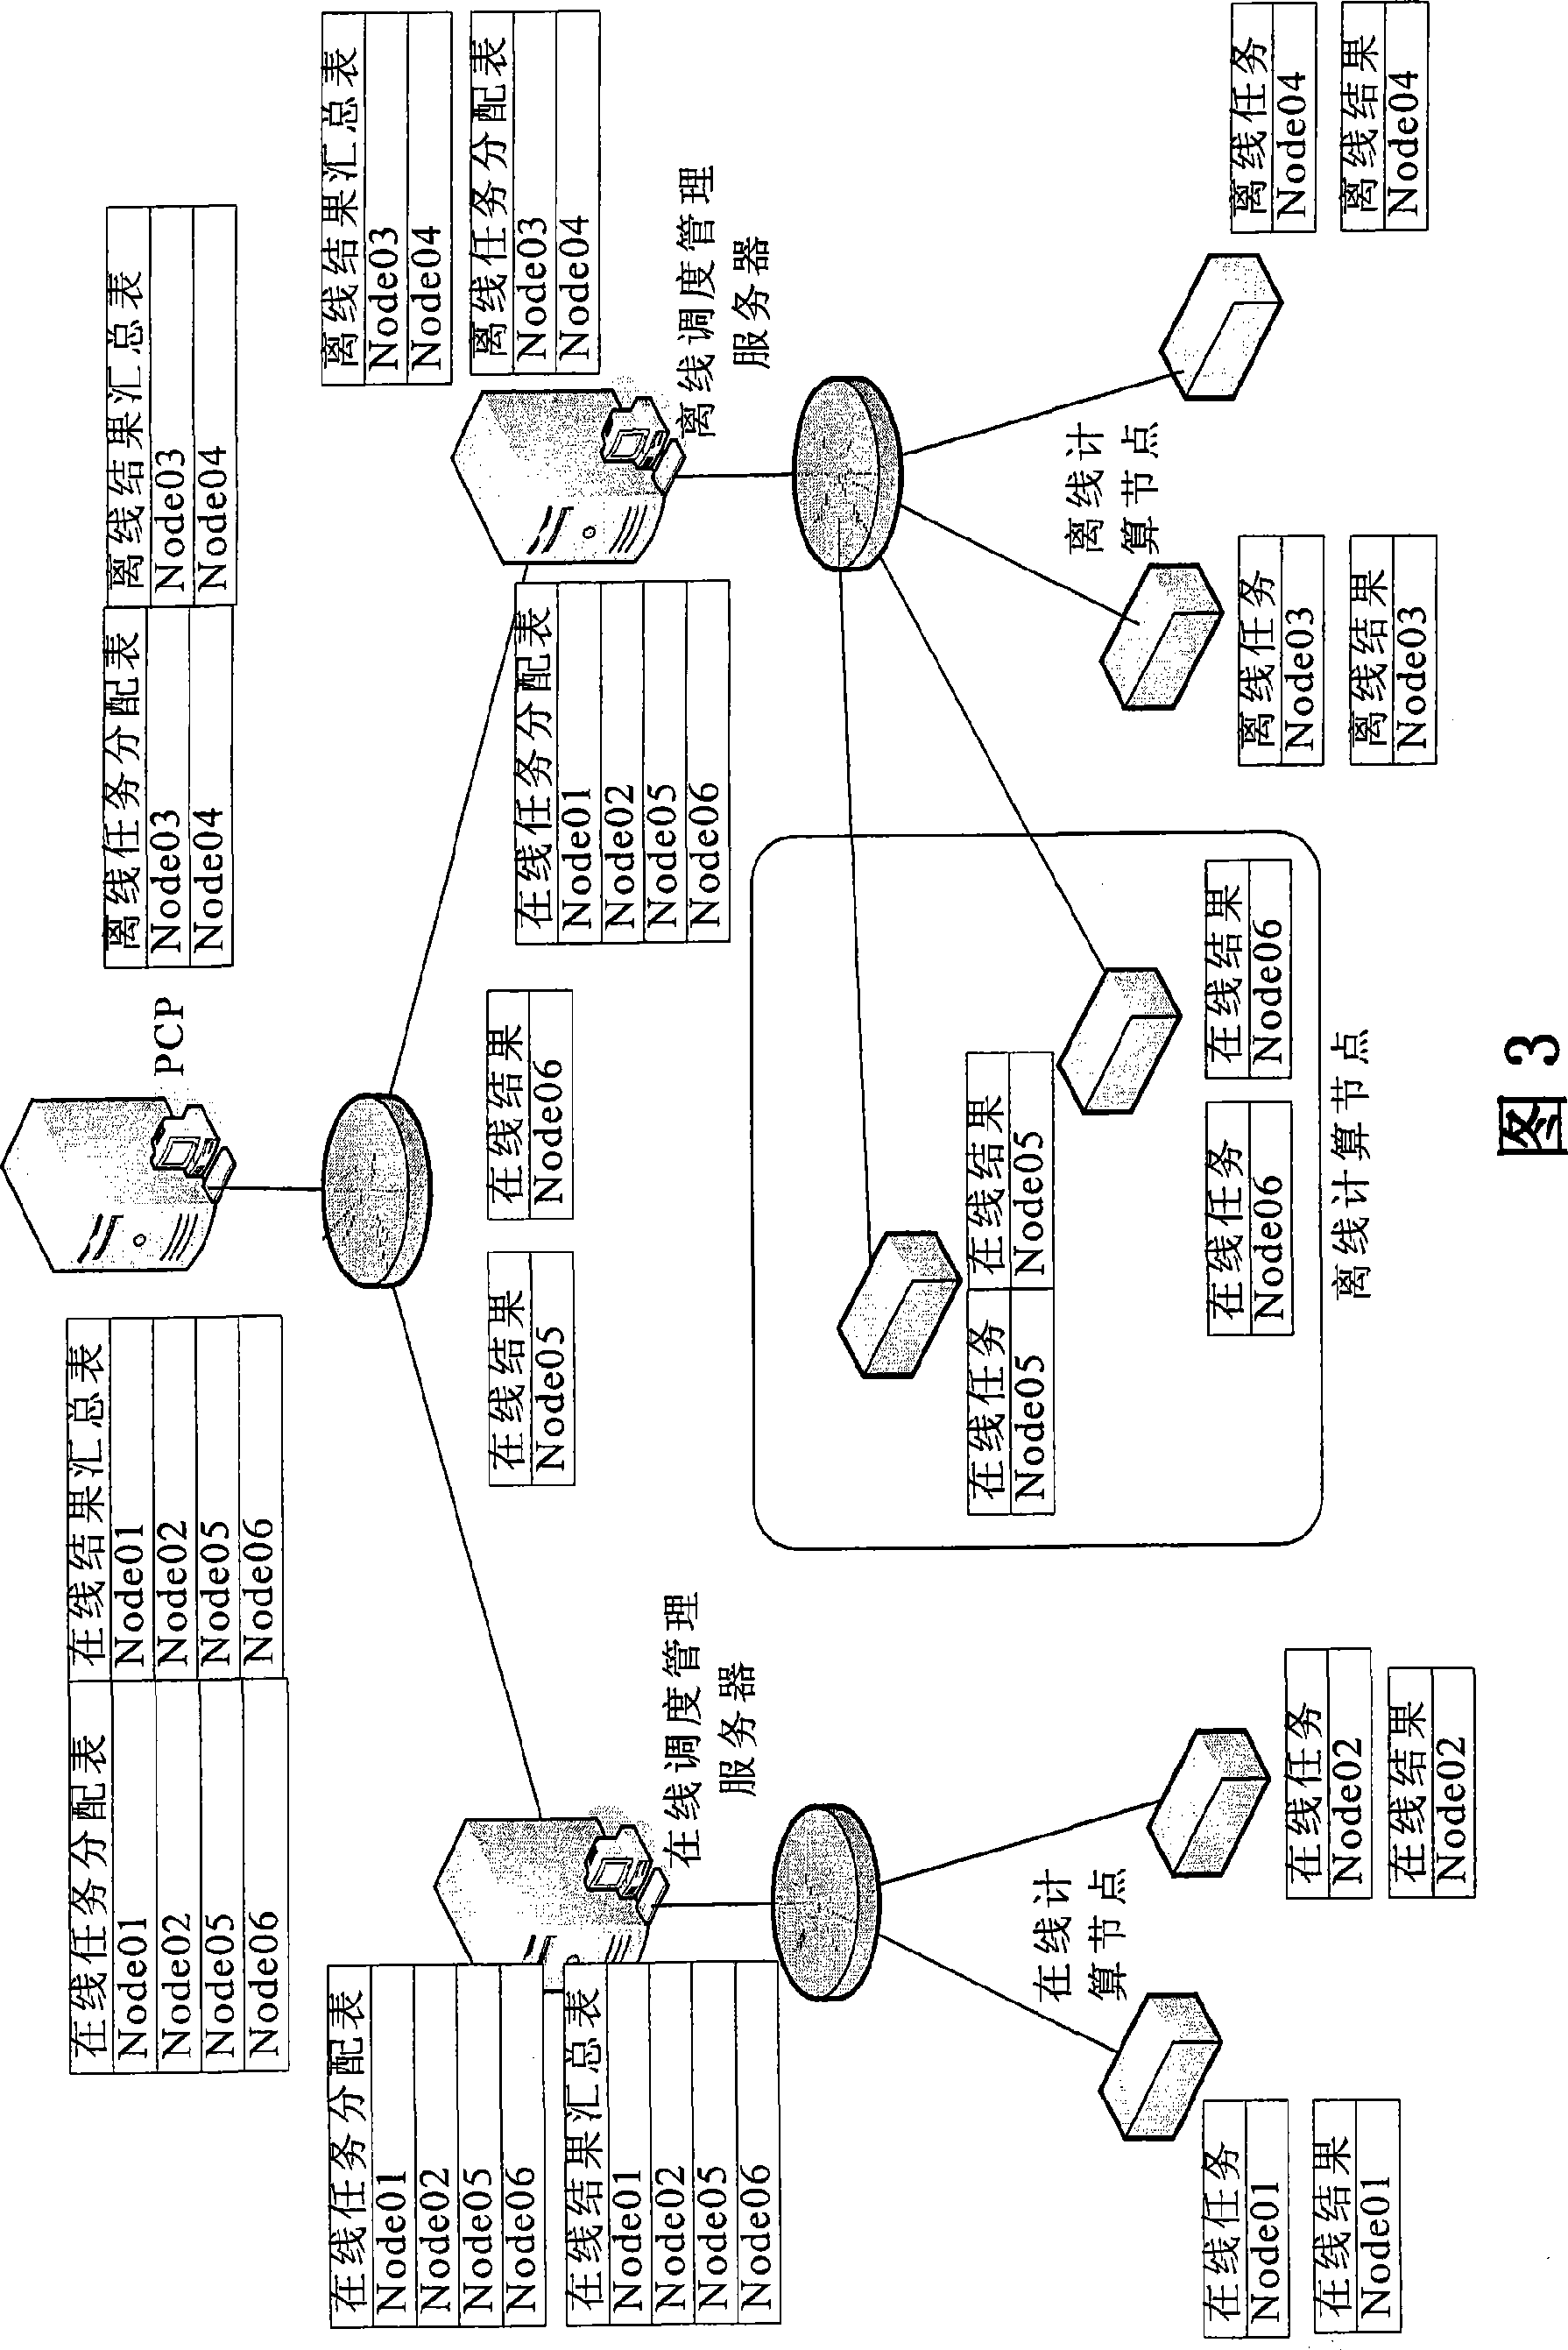 Distributed paralleling calculation platform system and calculation task allocating method thereof